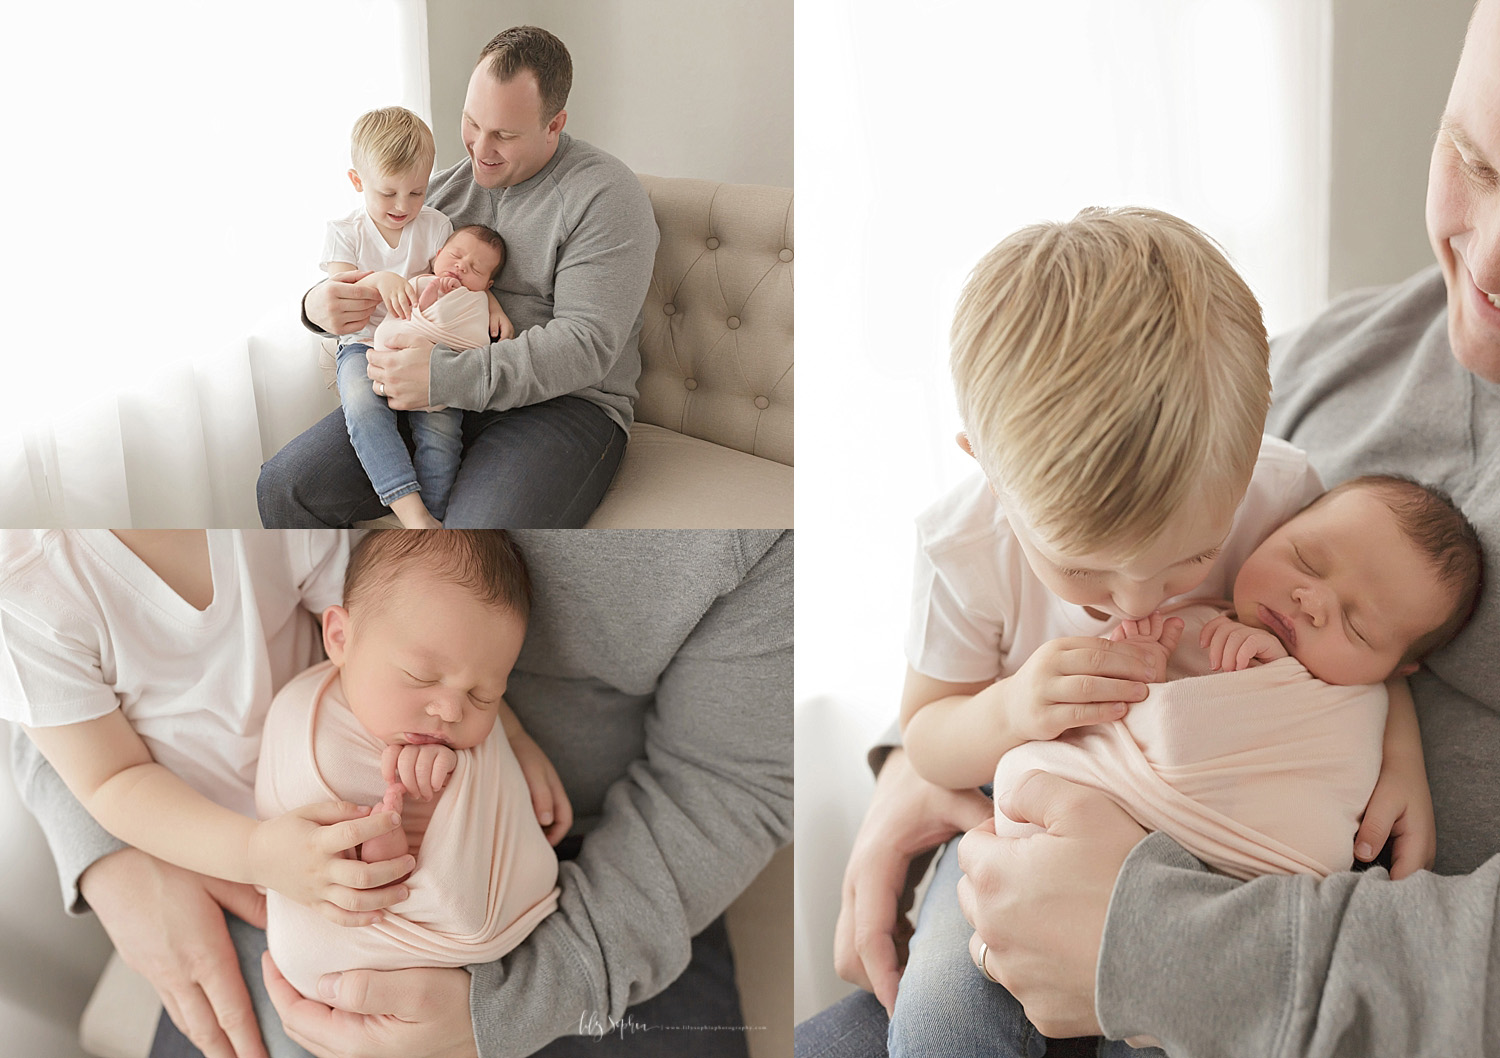  Image collage of a father sitting on a couch with his sleeping, newborn, baby, daughter, and his toddler son on his lap.&nbsp; 